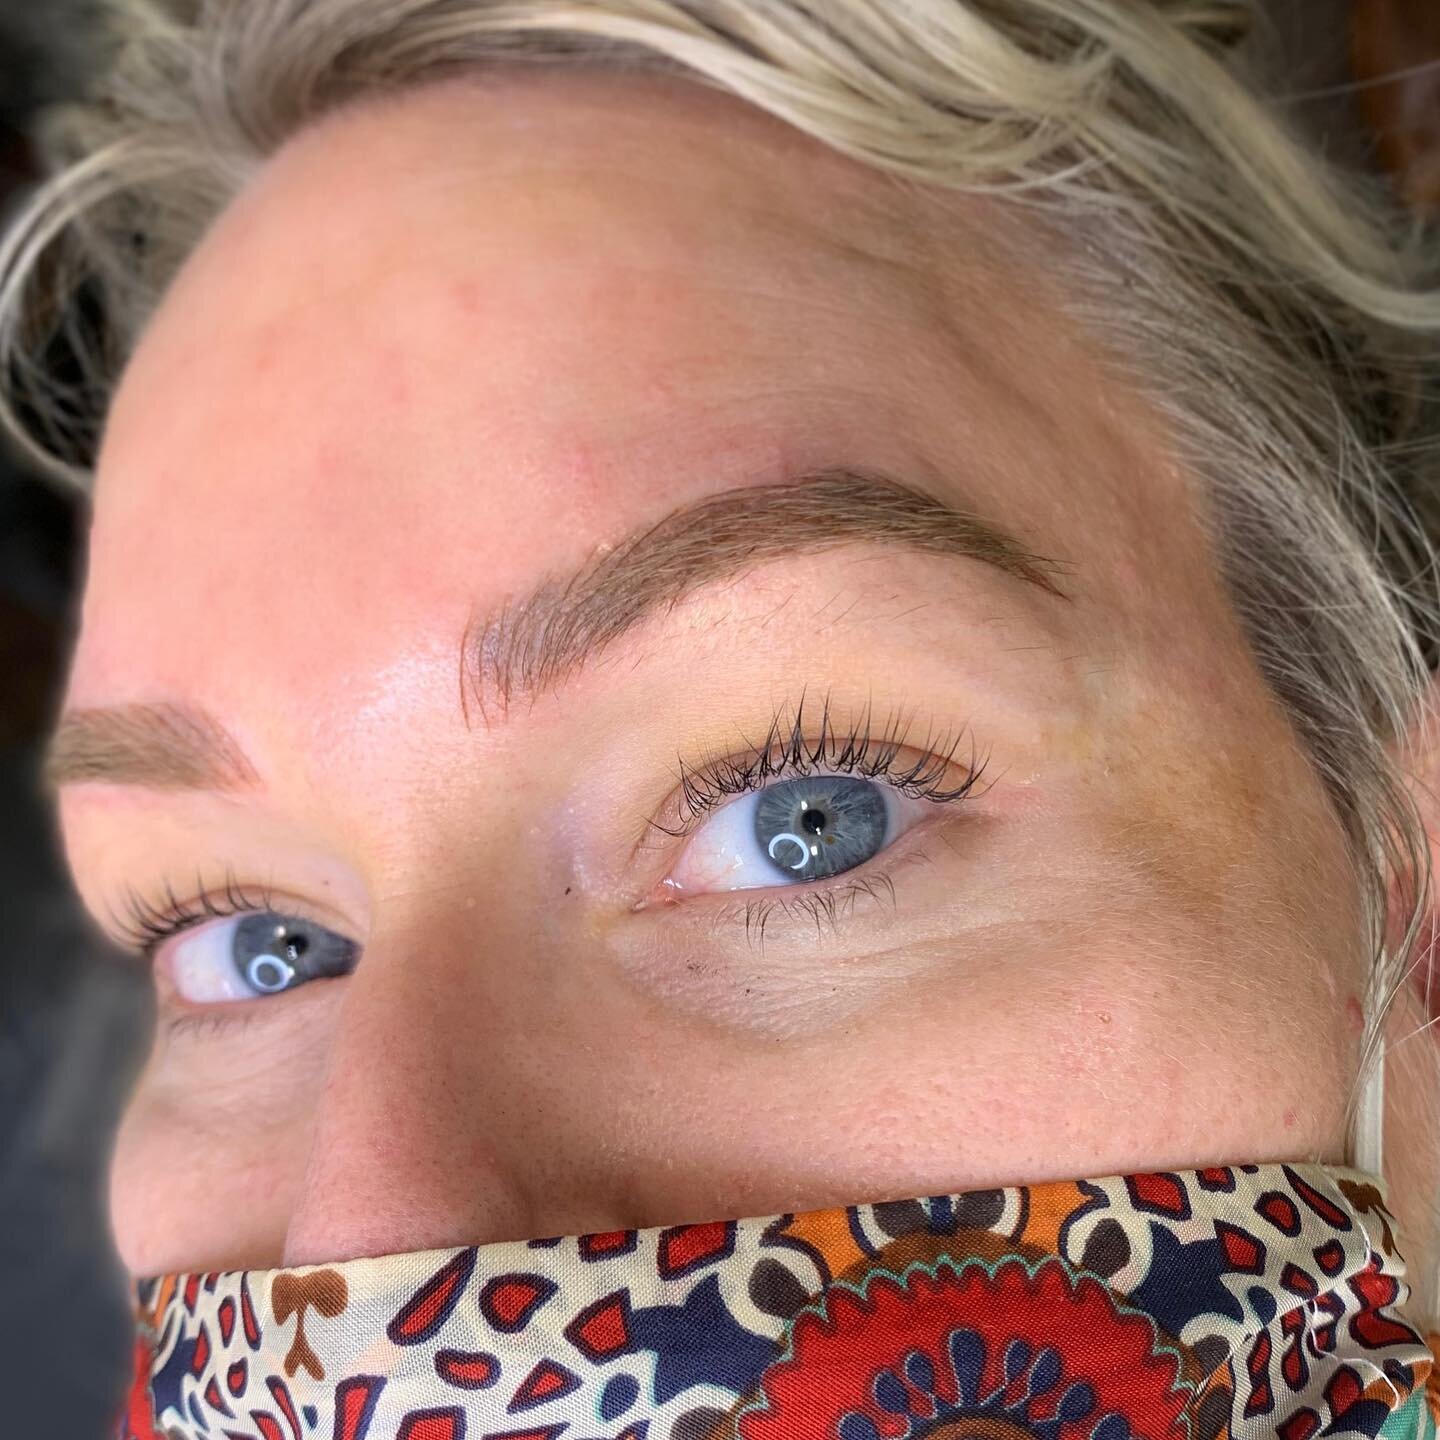 ✨rework story✨ 
She had her brows done by a different artist a few years ago.  When they started shifting to funky colors, she decided to do a few sessions of saline removal.  She let her skin fully heal from removal and came in for a rework/coverup.